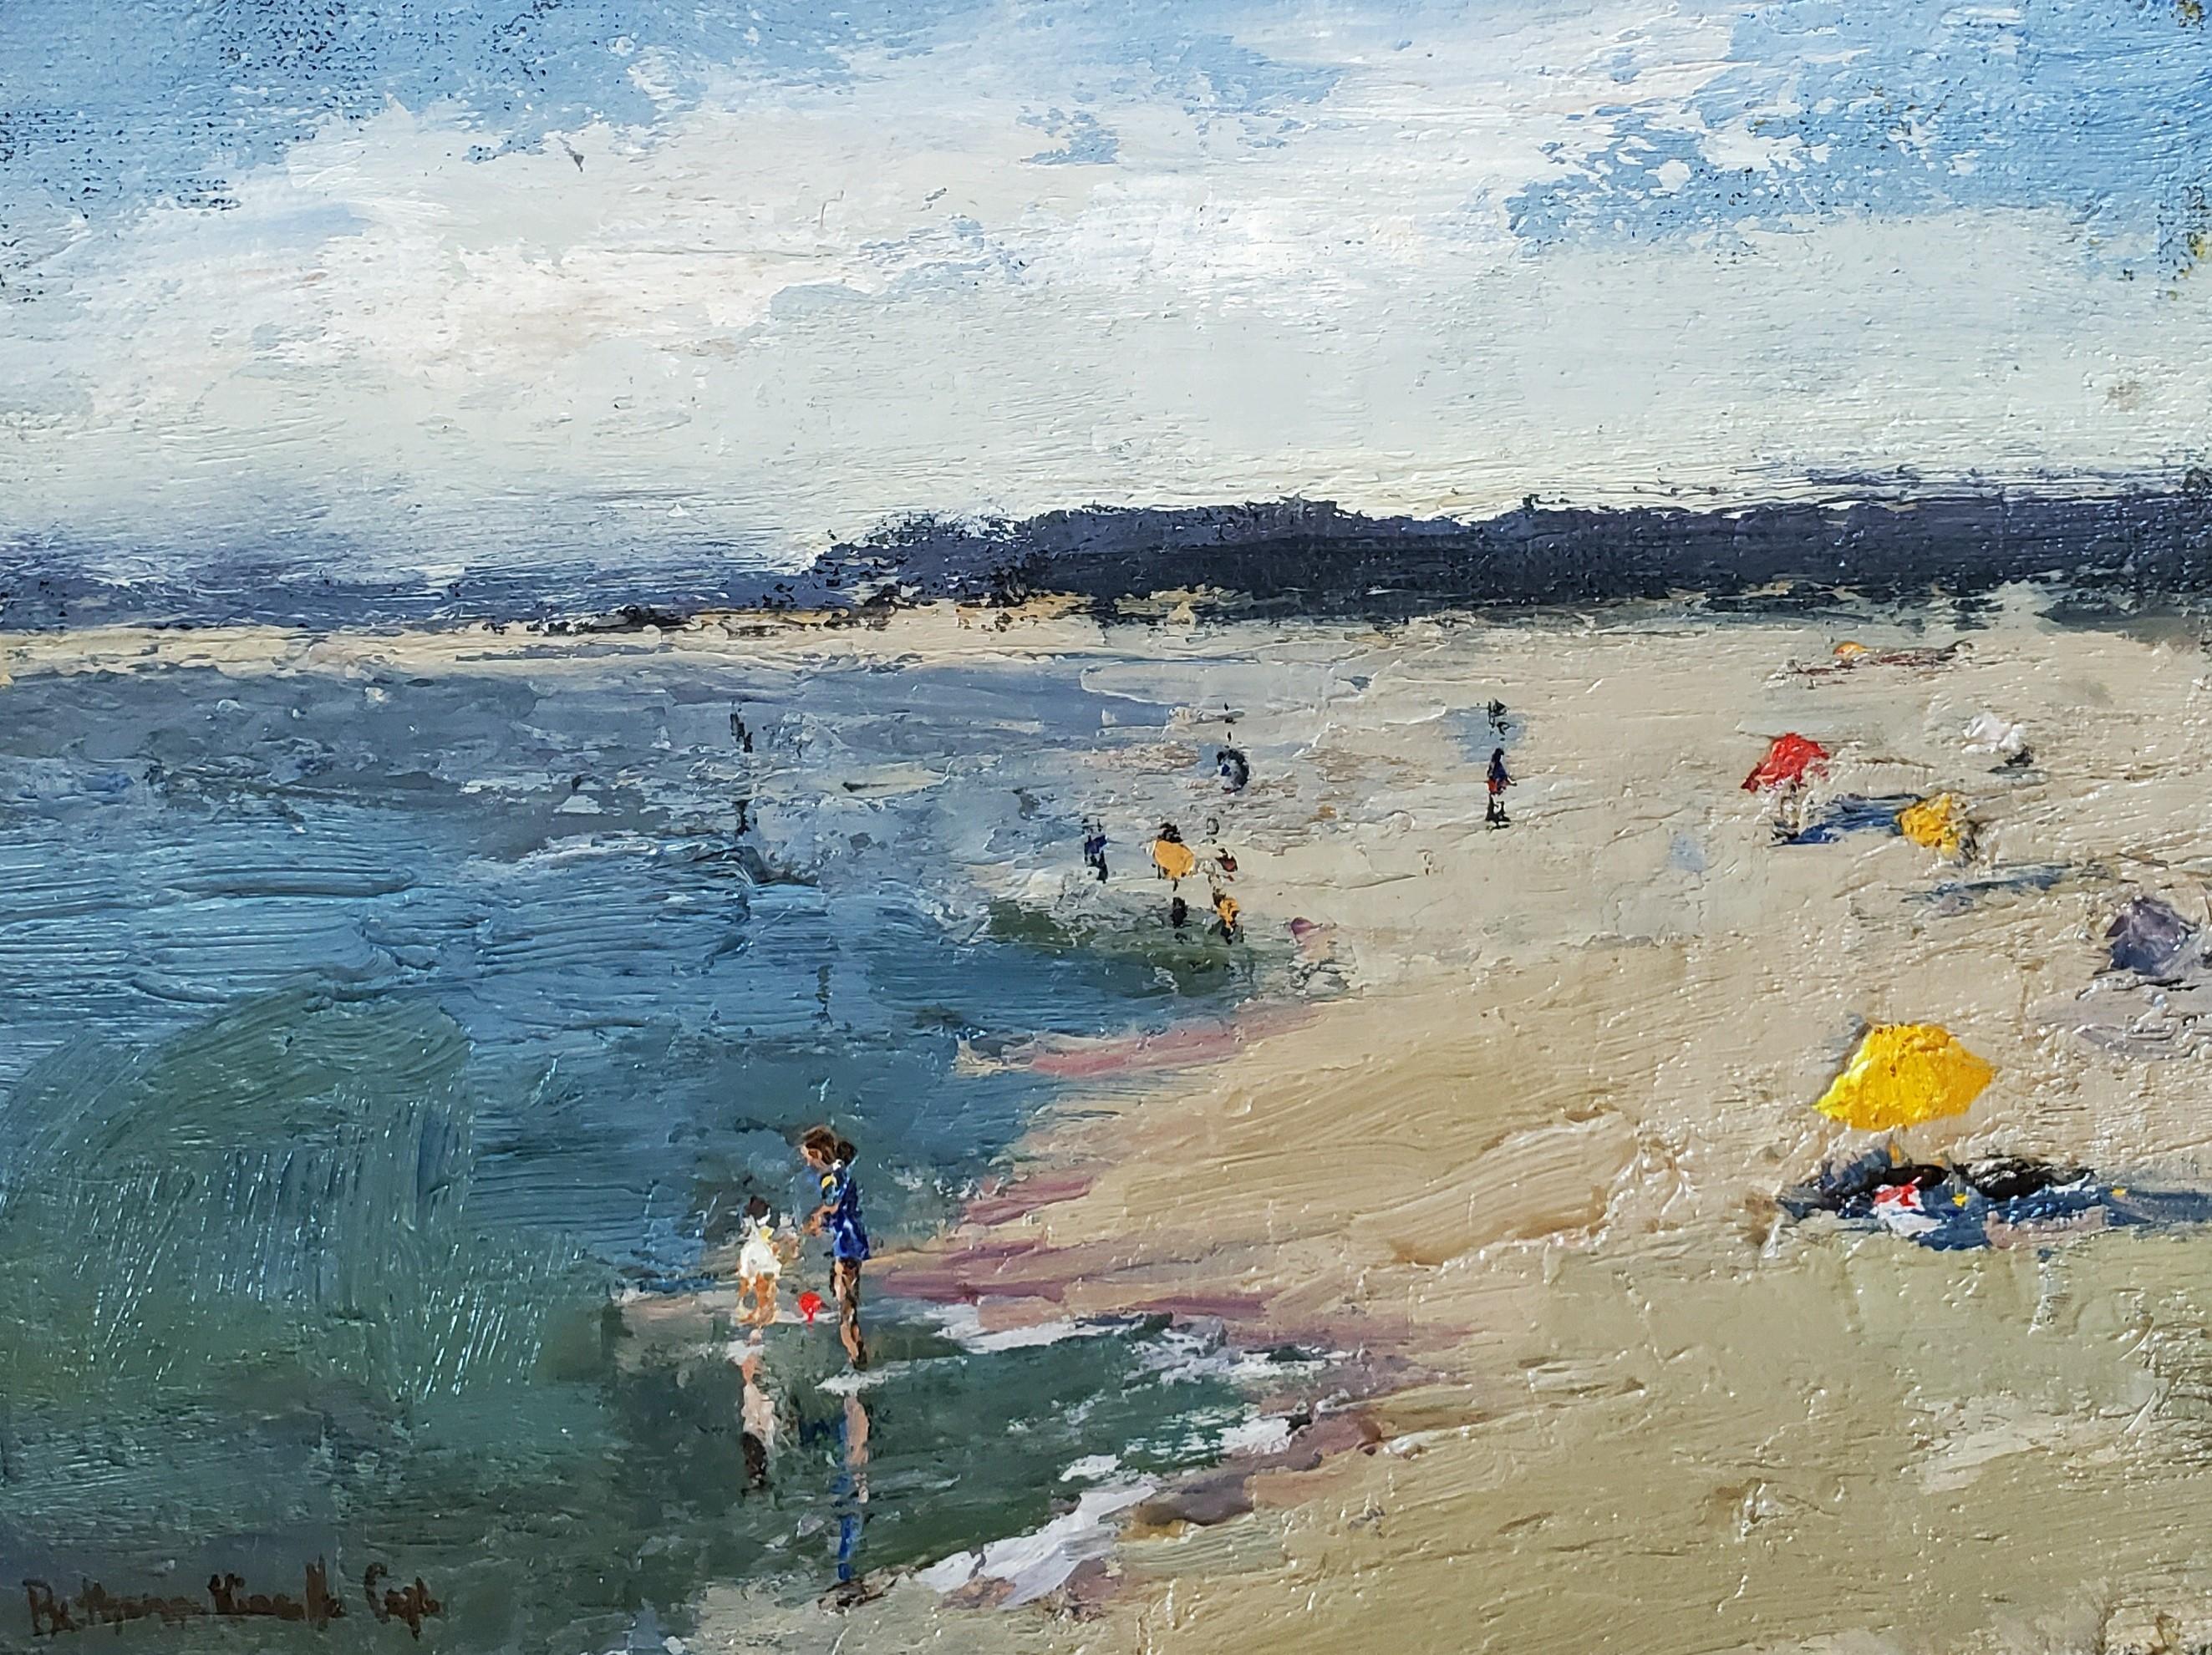 Bethanne Kinsella Cople Landscape Painting - Basked in the Sun by Bethanne Cople, Oil on Board Landscape painting of Beach